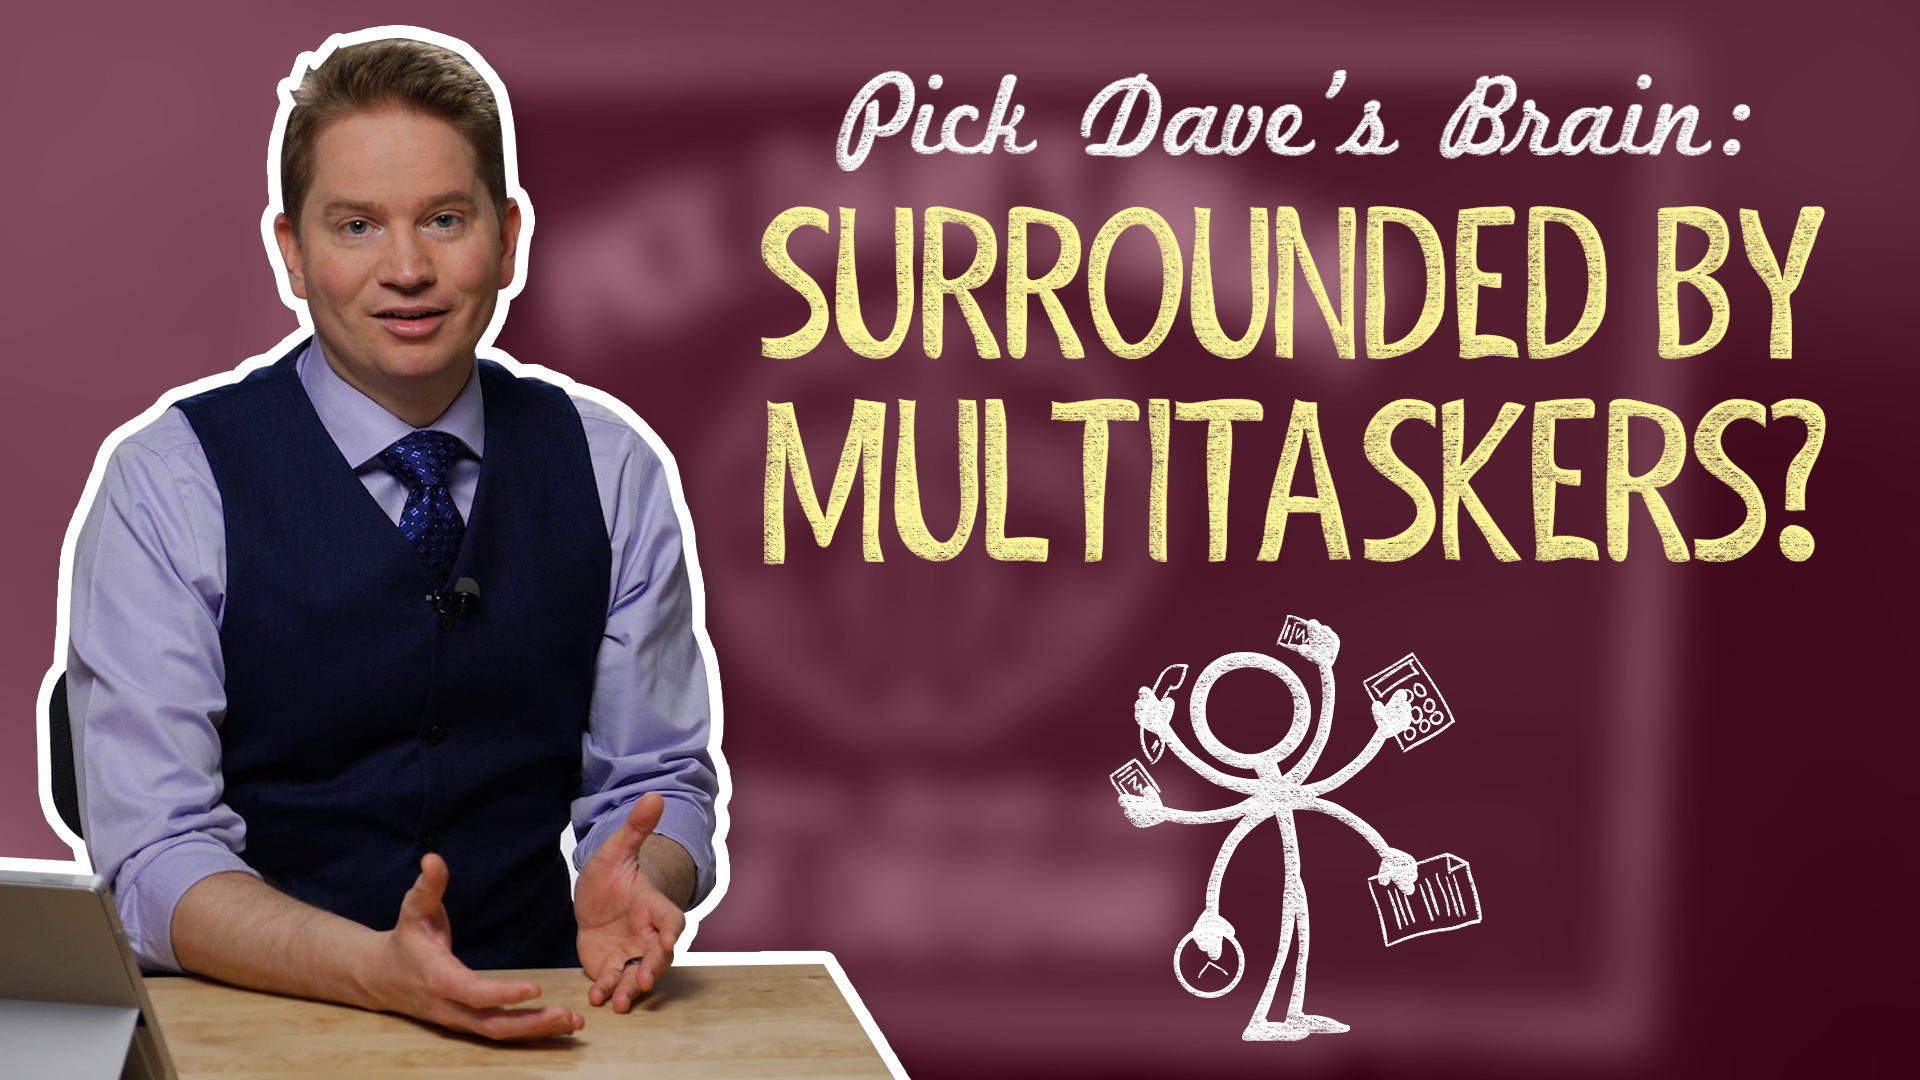 Surrounded by multitaskers? Here’s what to do – Pick Dave’s Brain